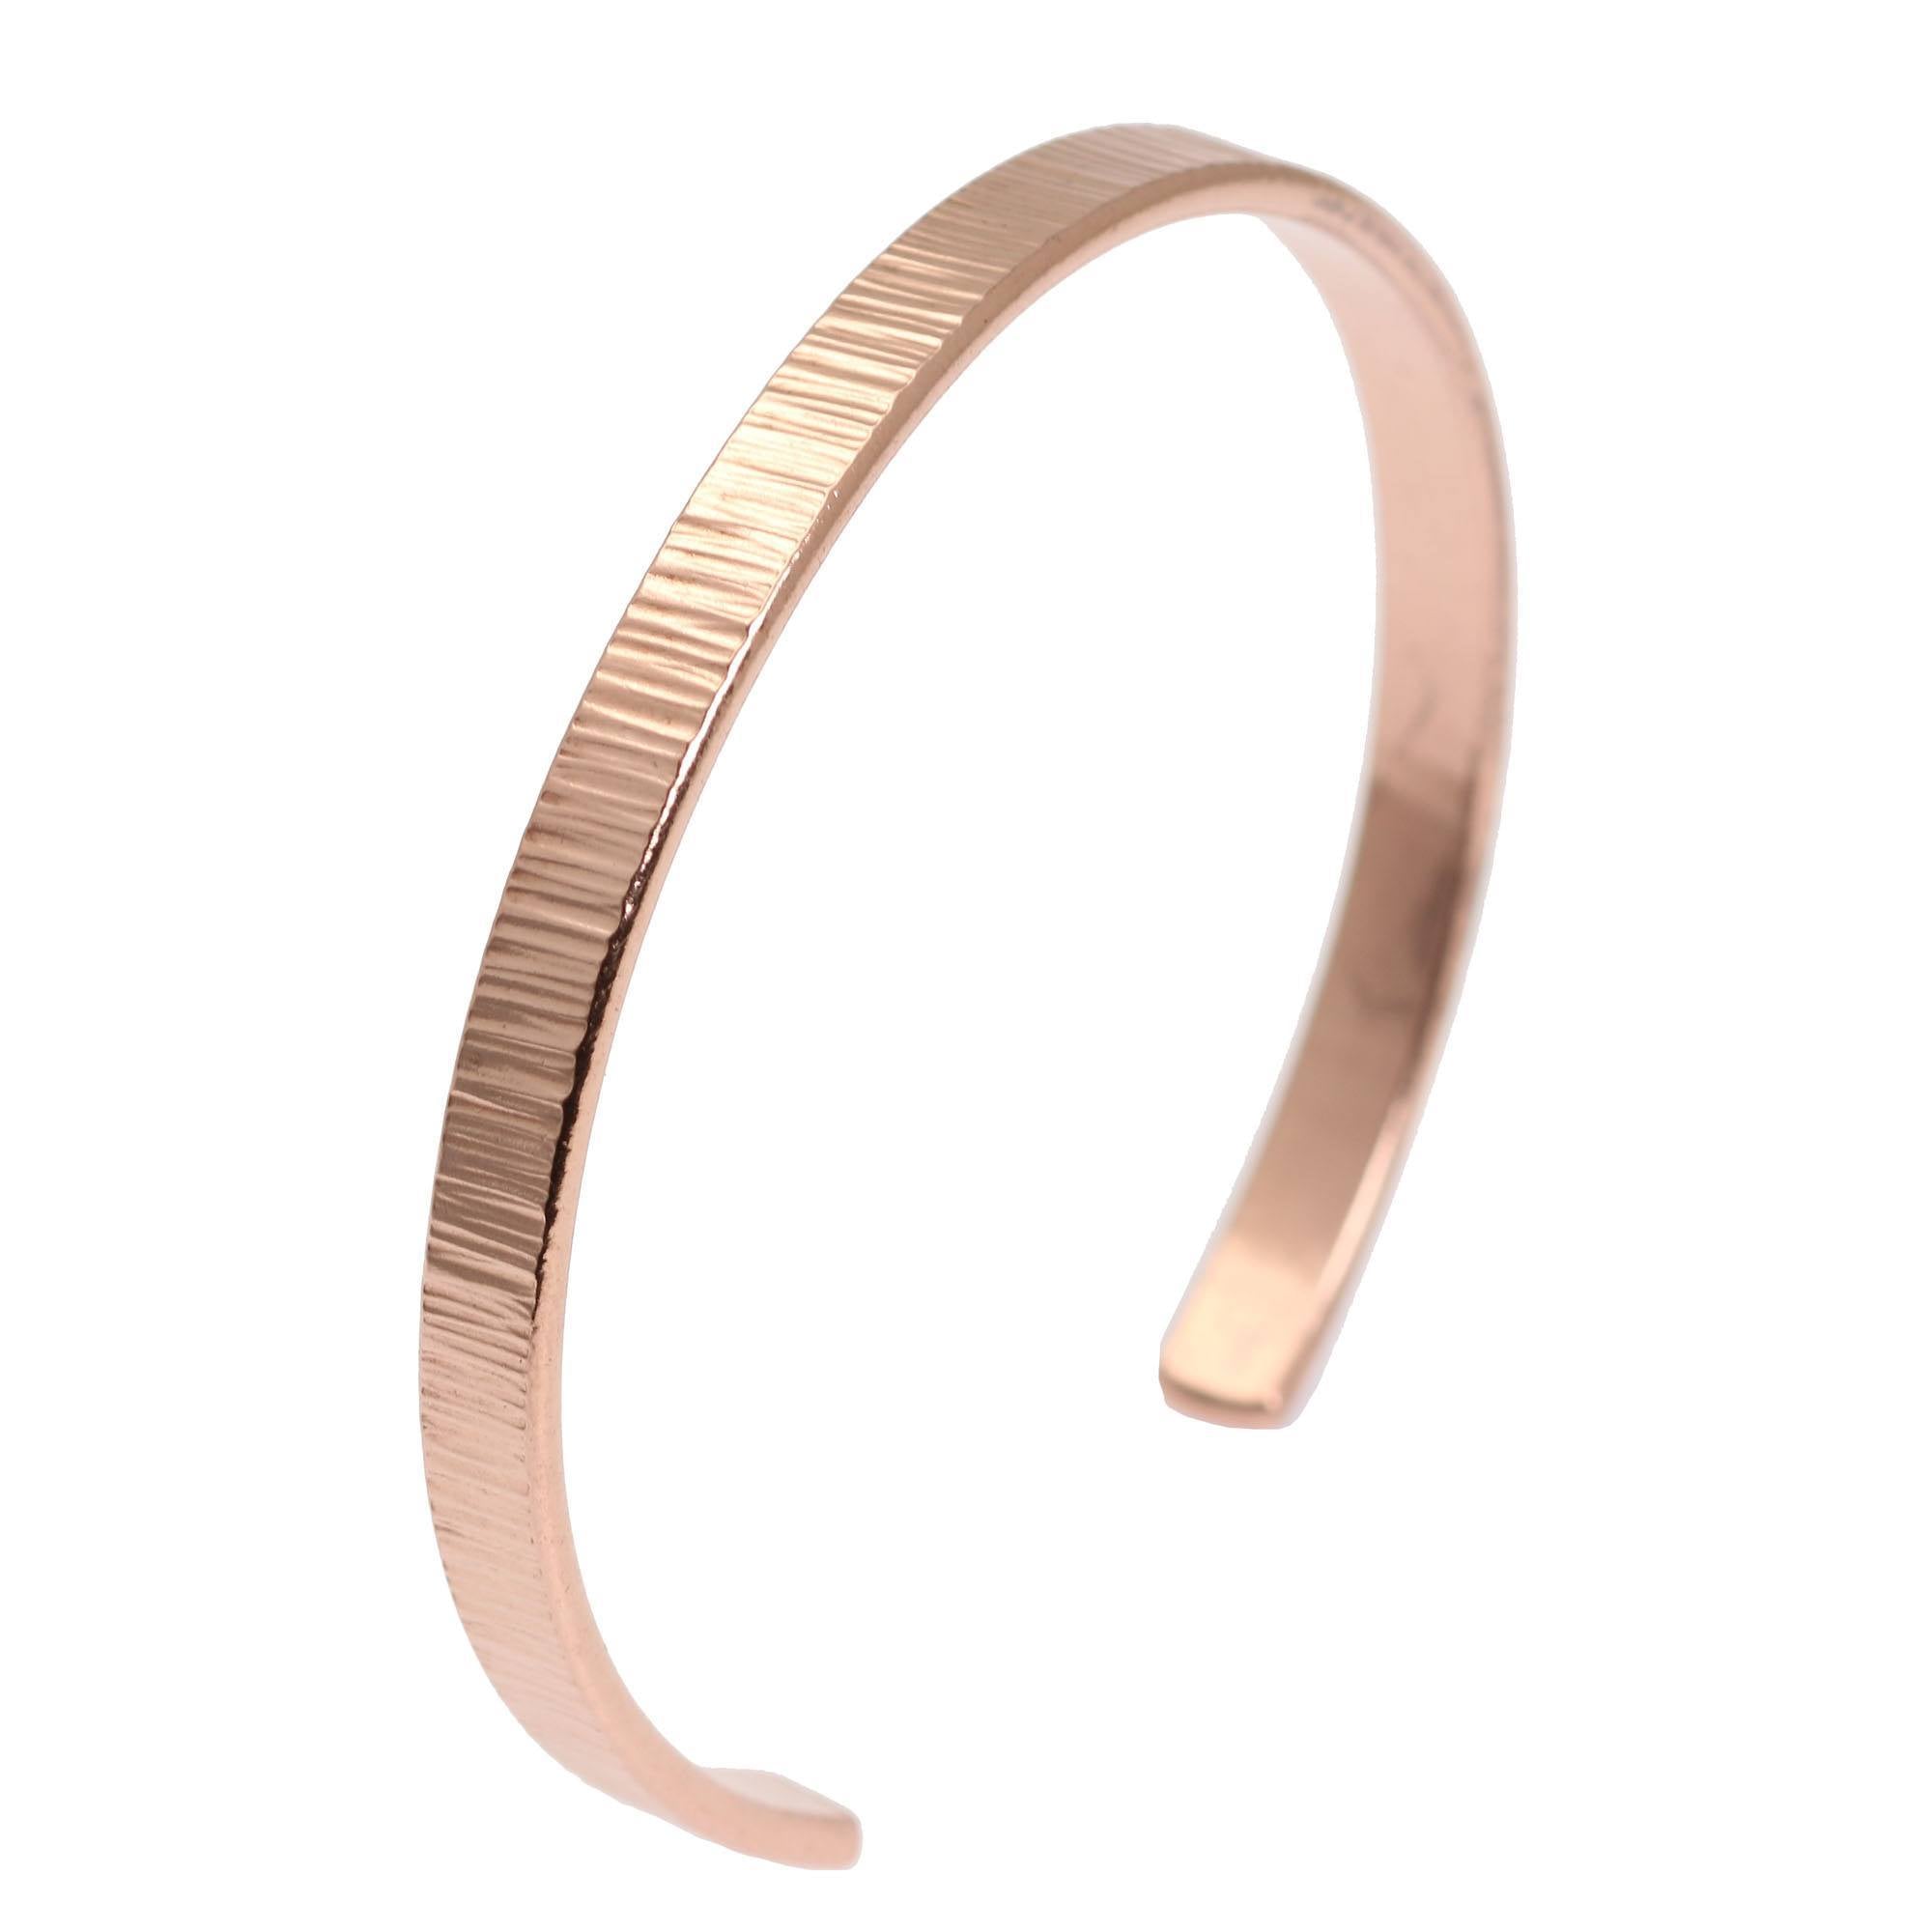 Left View of Men's Thin Chased Copper Cuff Bracelet